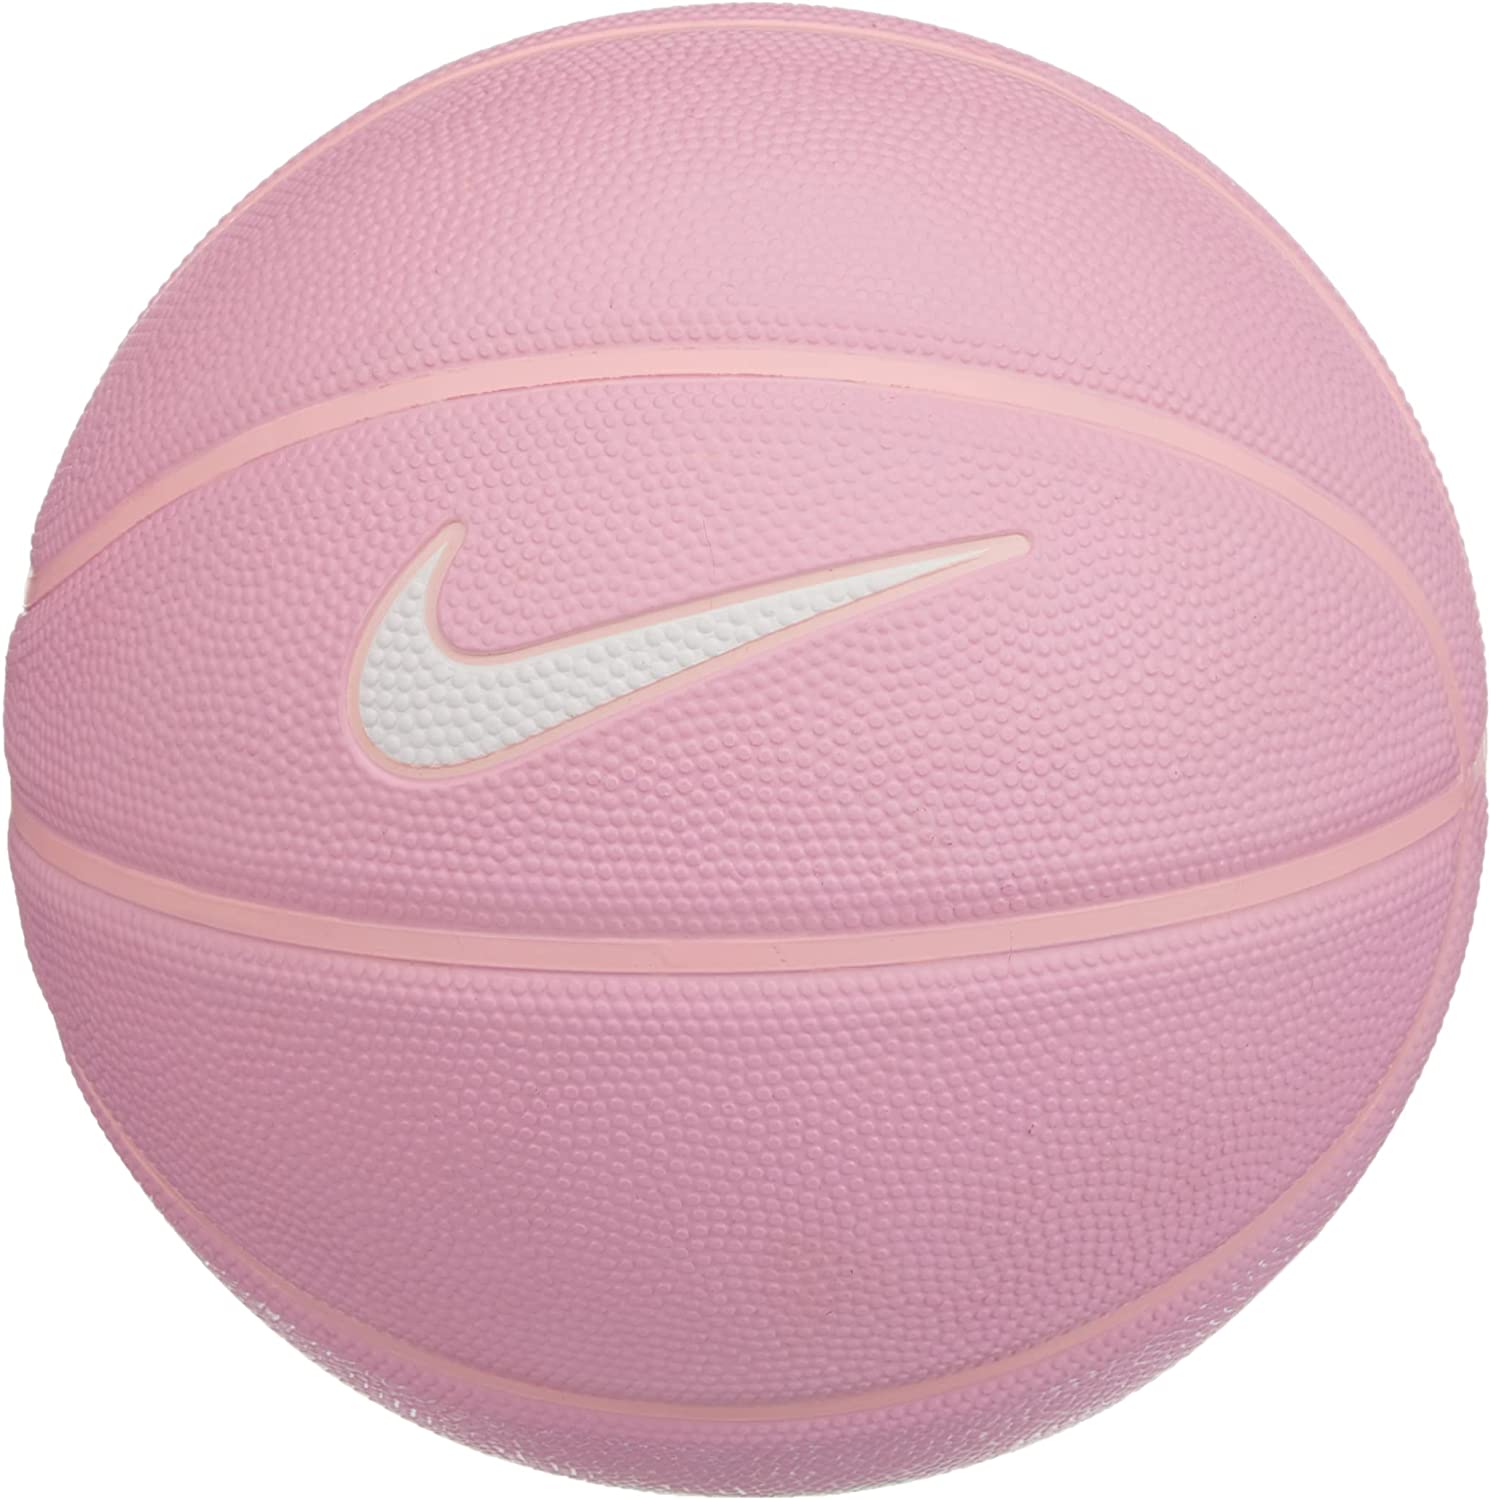 The 11 Best Nike Basketballs of 2022: A Comprehensive Review